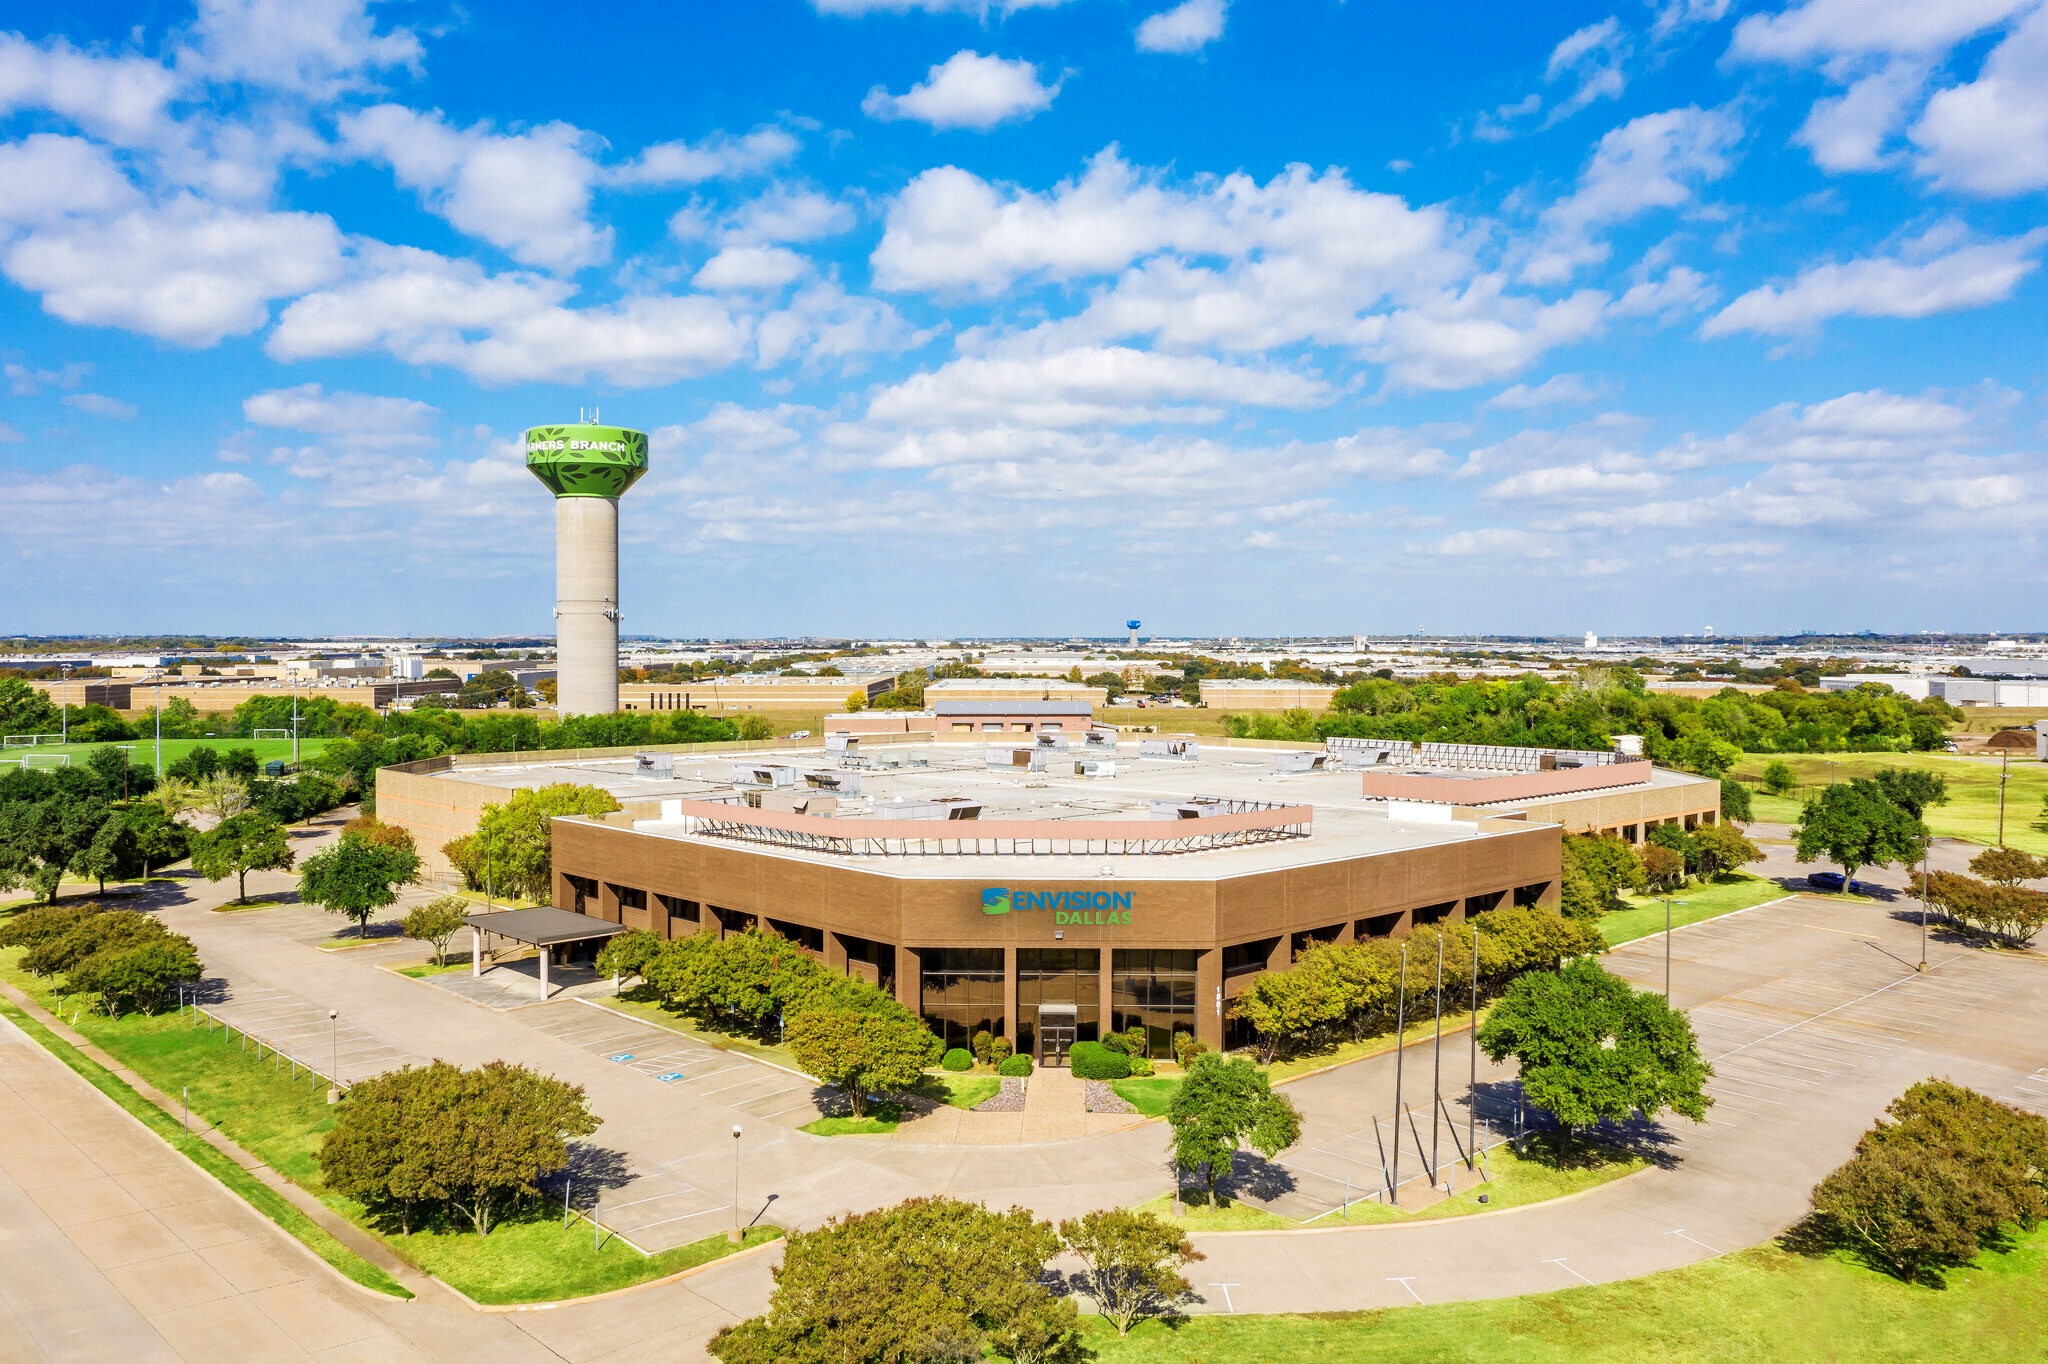 Wide shot of new Envision Dallas building in Farmers Branch with water tower in the background and blue skies and fluffy coulds